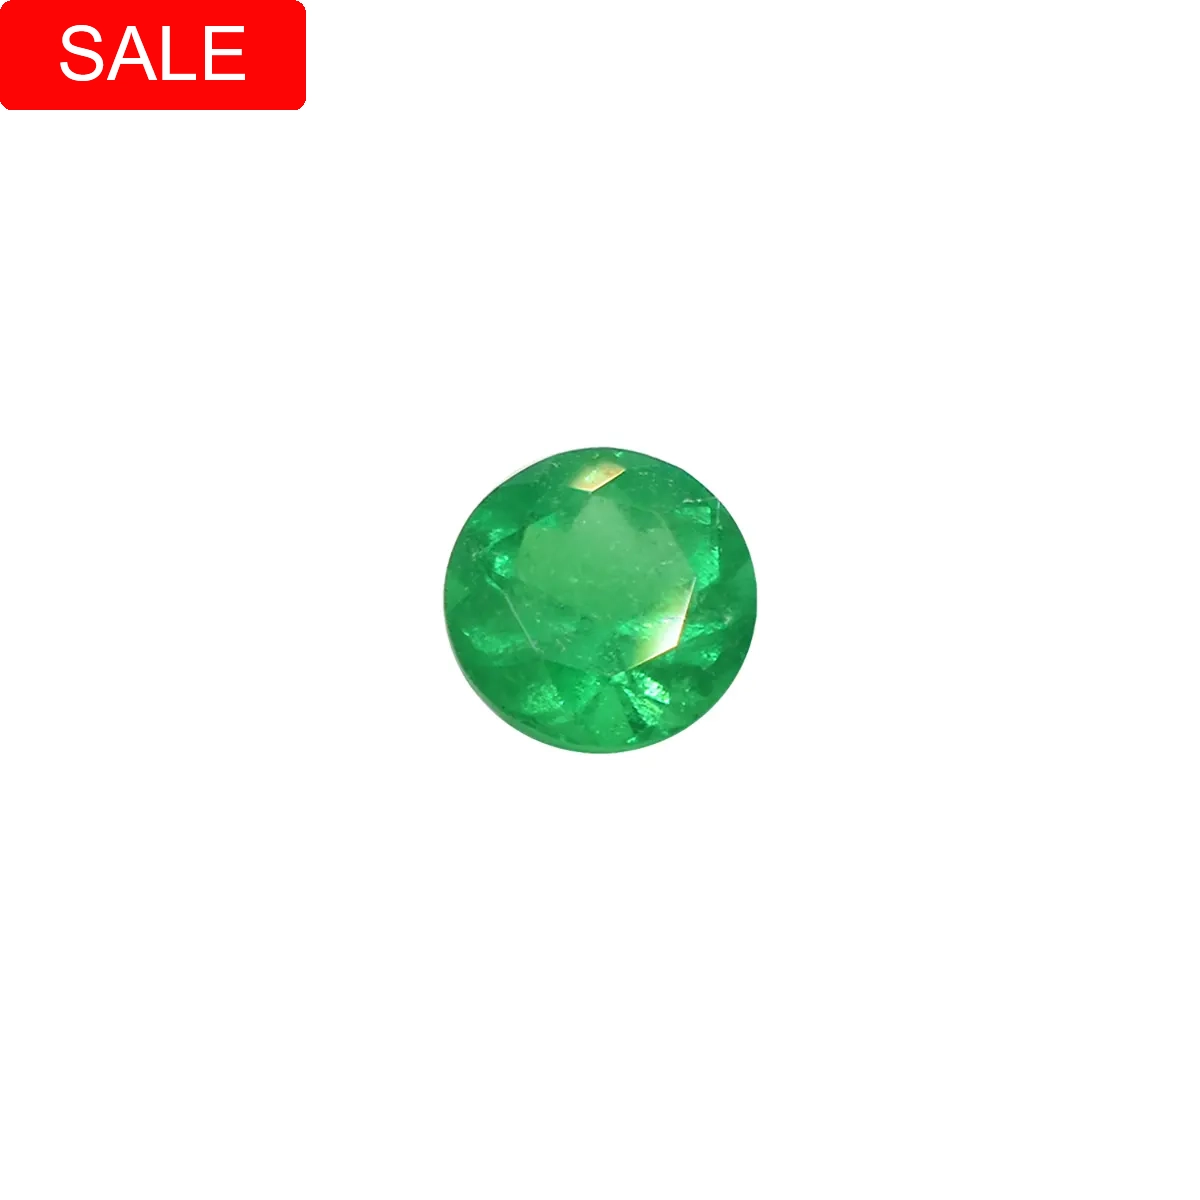 Loose round natural Colombian emerald with stunning green color in 0.74 Ct. weight